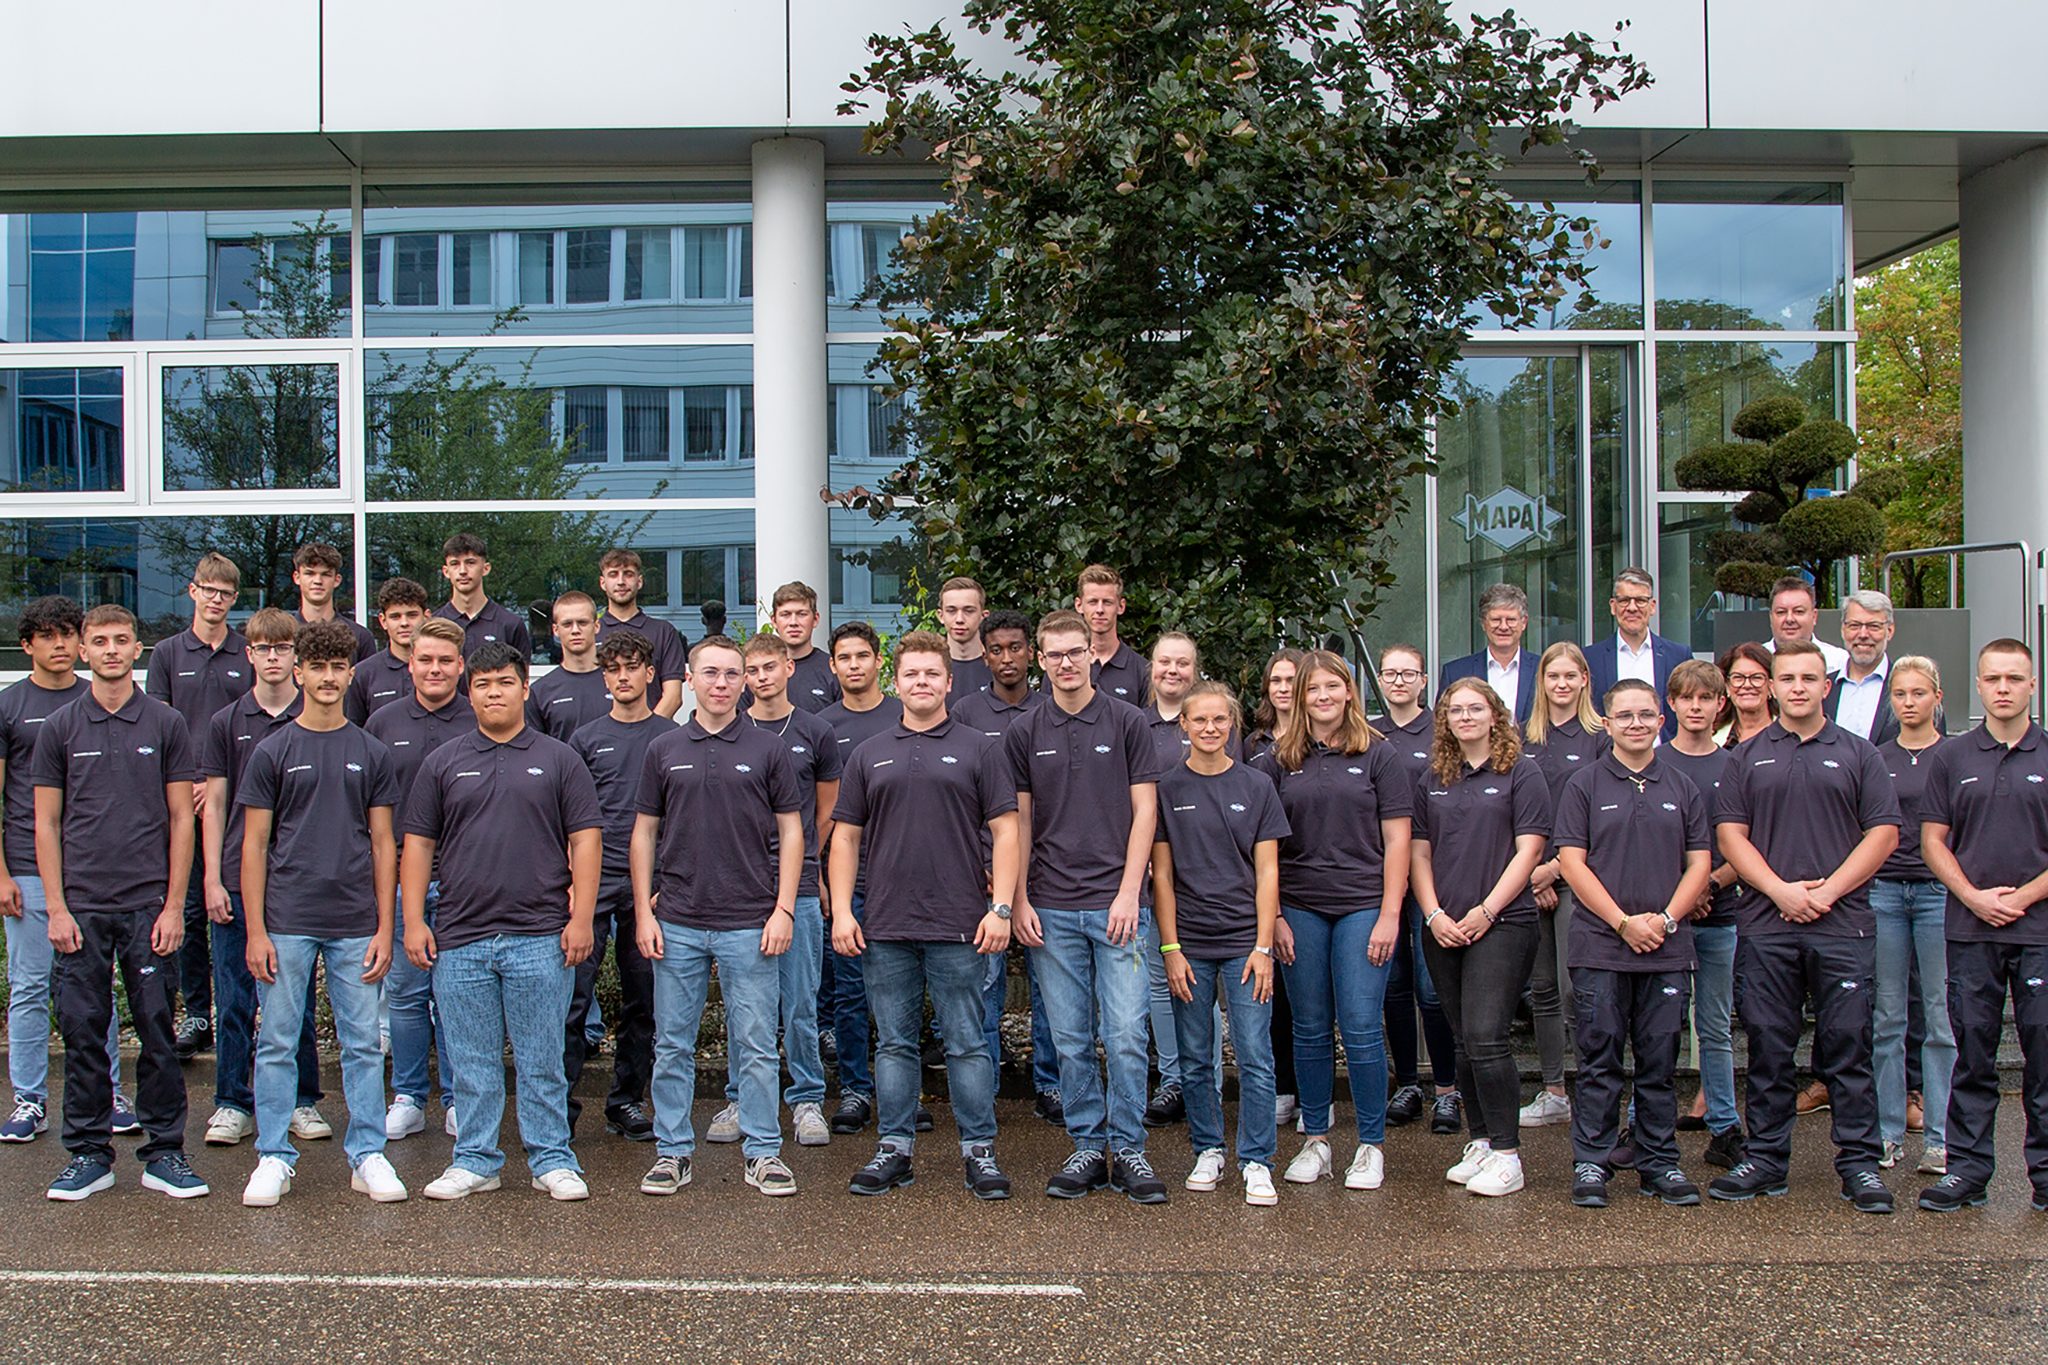 The new apprentices at the headquarters in Aalen with the trainers, supervisors and MAPAL CEO Dr. Jochen Kress.